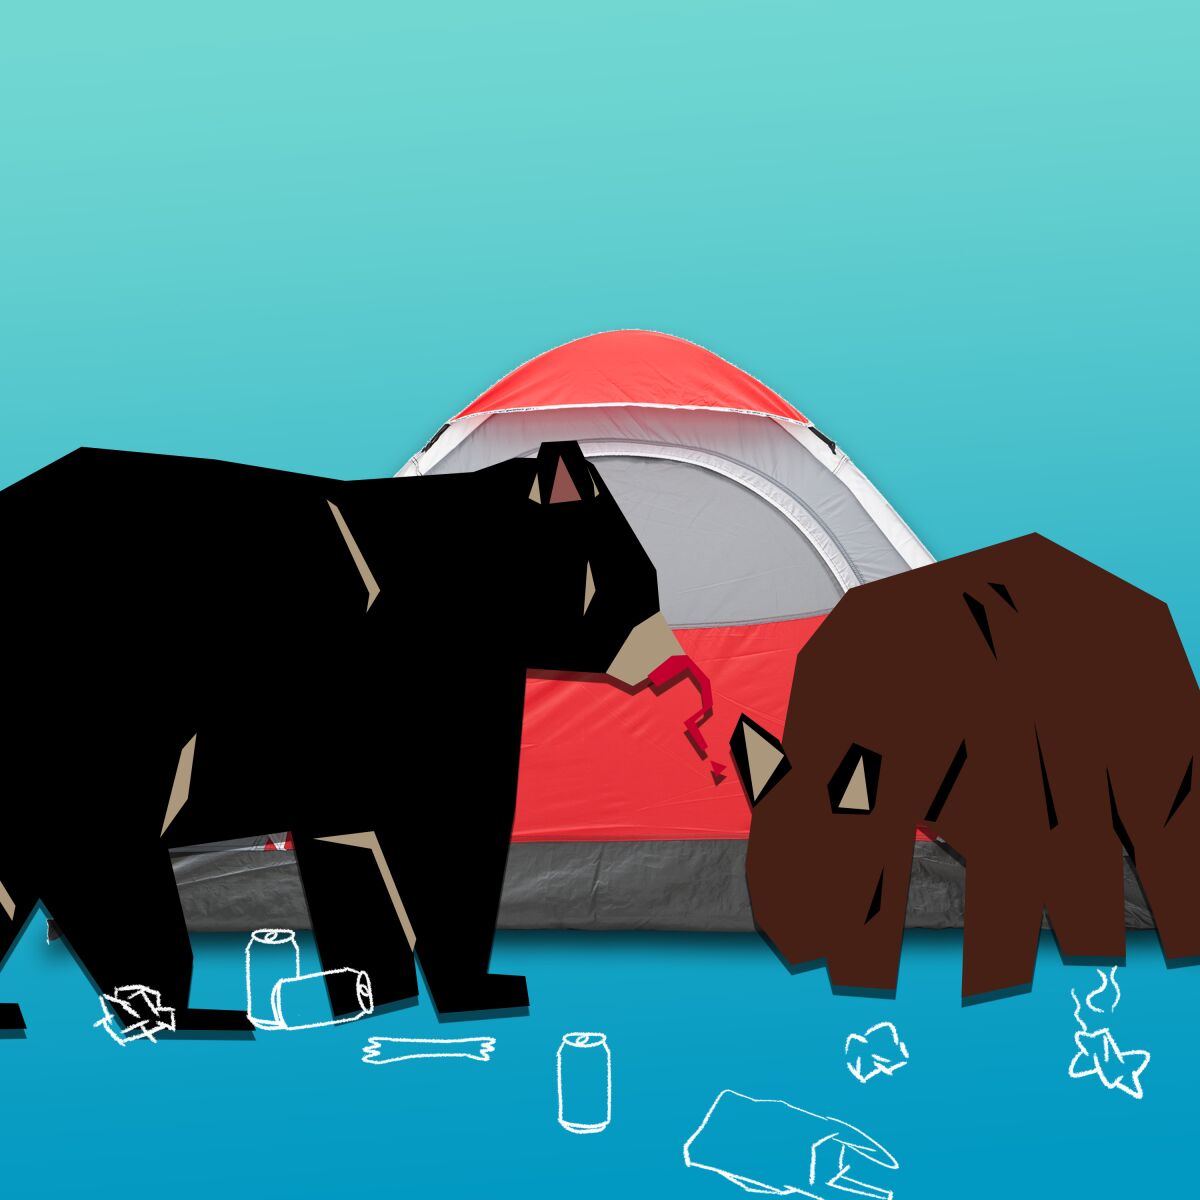 An illustration of two bears eating trash